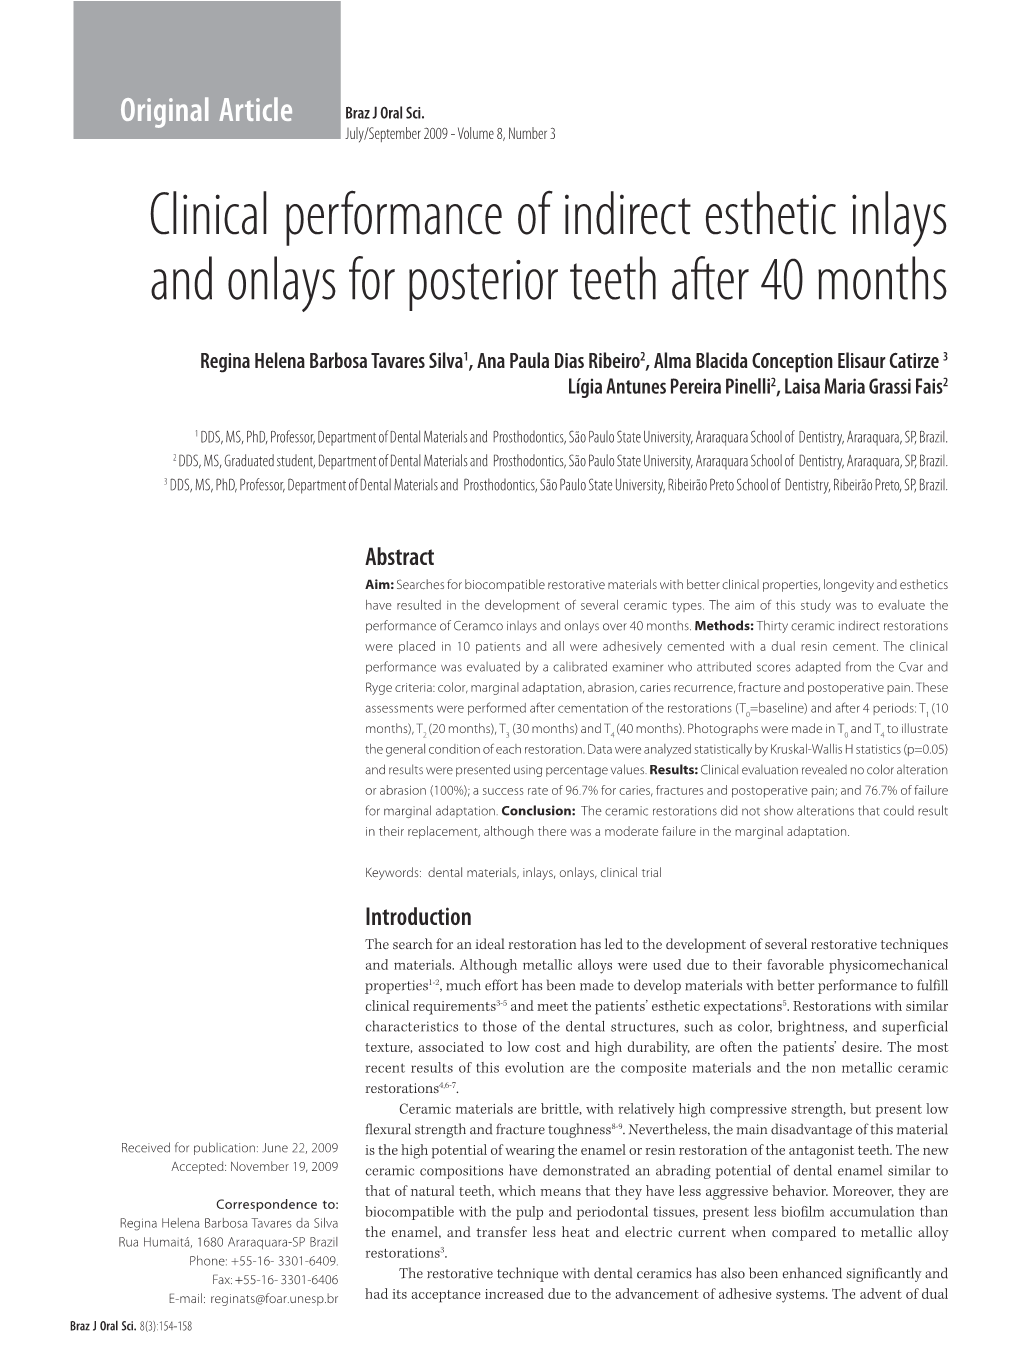 Clinical Performance of Indirect Esthetic Inlays and Onlays for Posterior Teeth After 40 Months